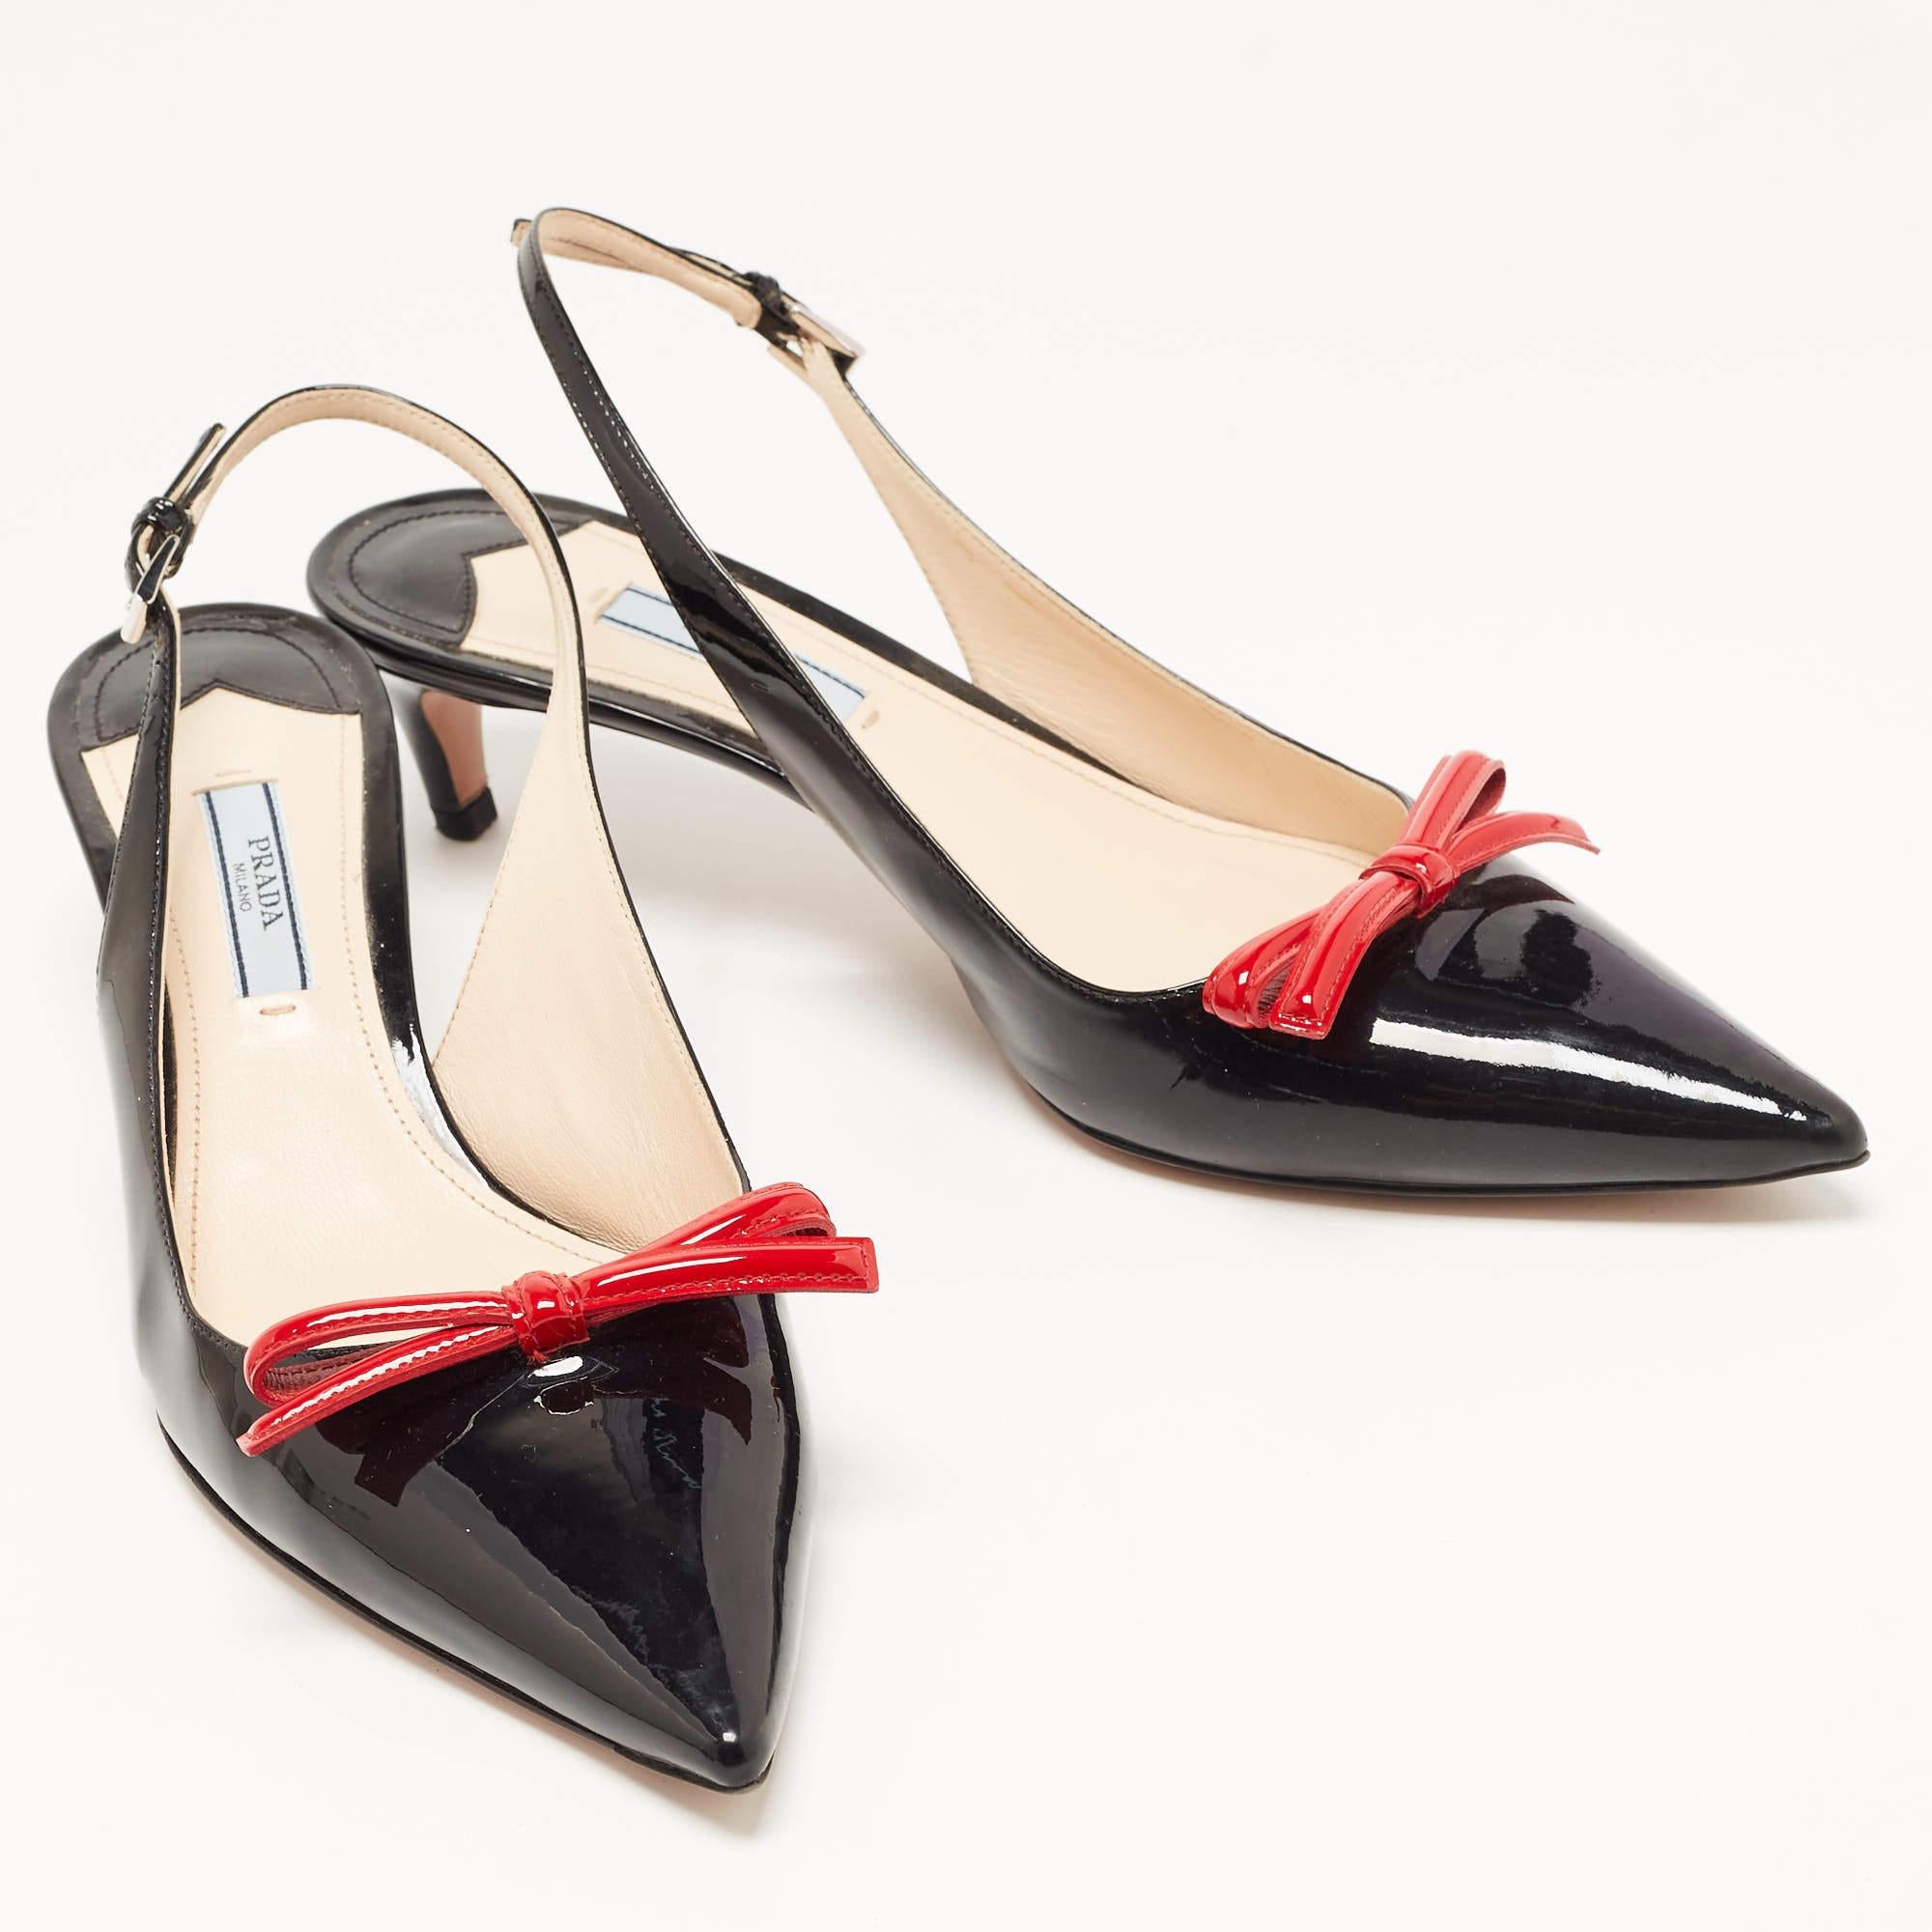 Prada Black/Red Patent Leather Bow Pointed Toe Slingback Sandals Size 40.5 1